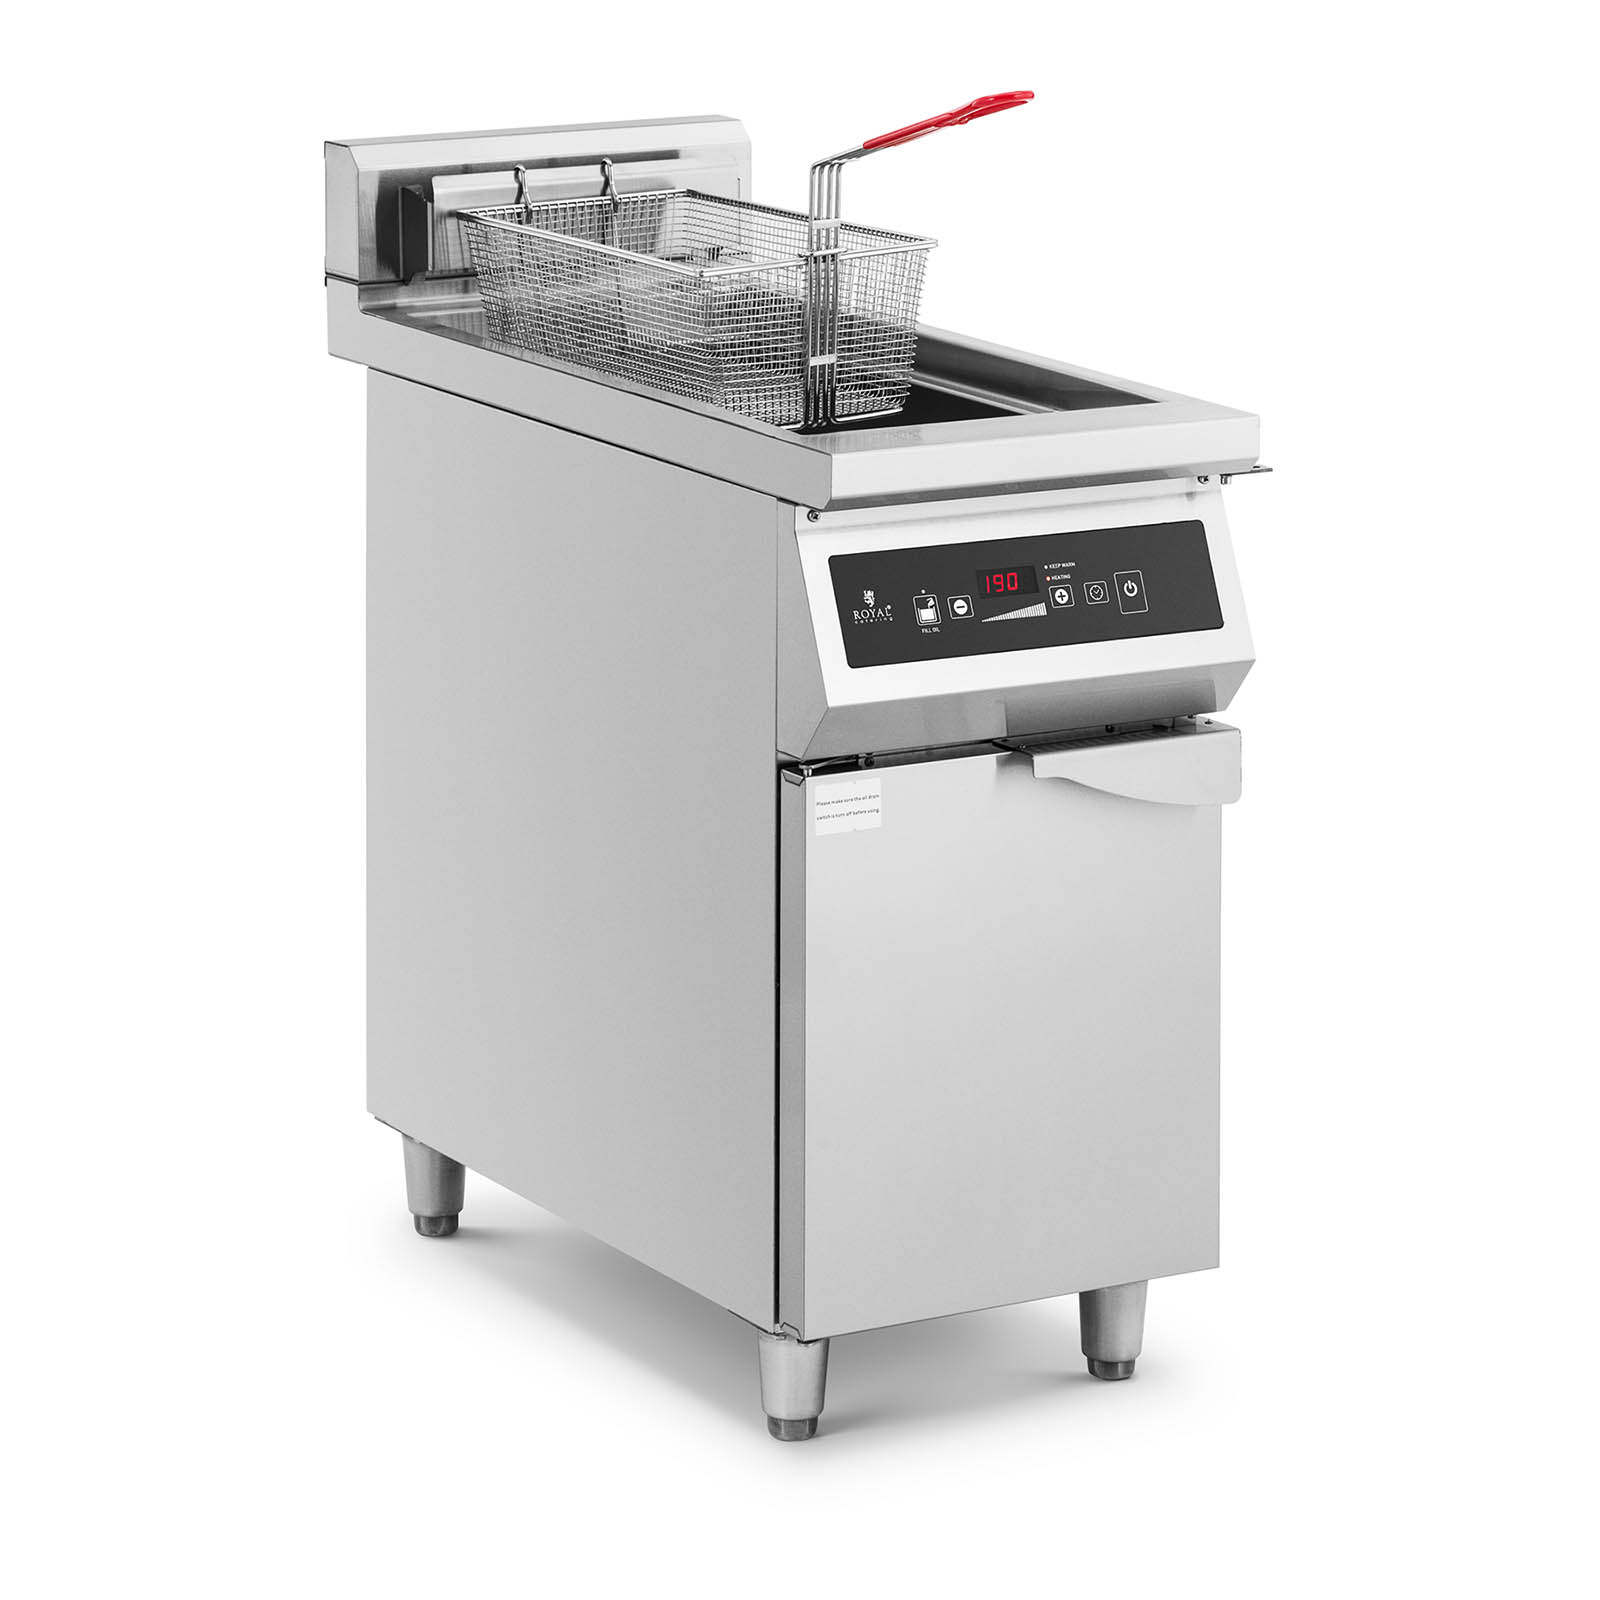 Induktionsfritteuse - 30 L - 60 bis 190 °C - Royal Catering